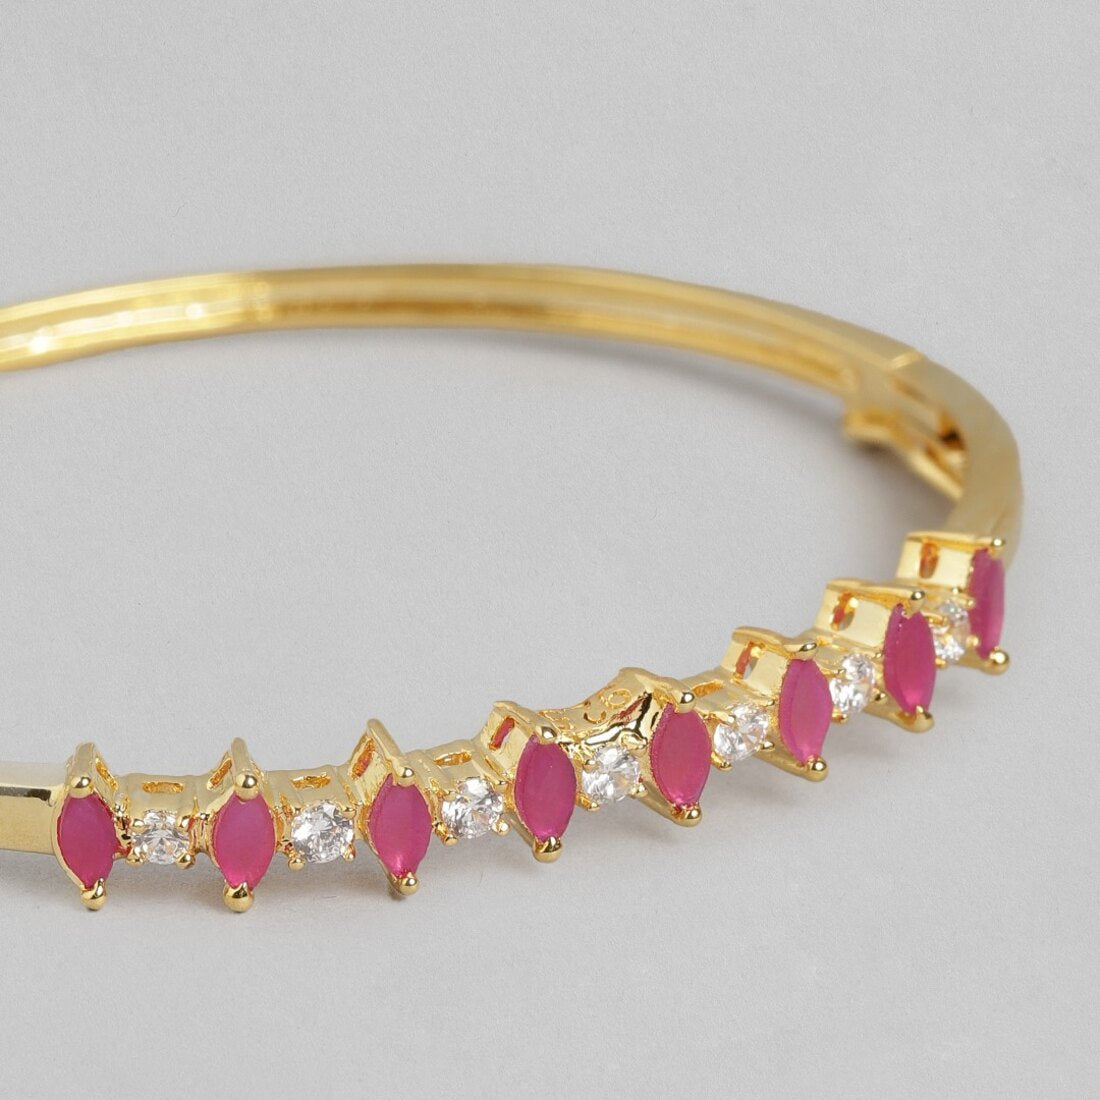 Radiant Fusion Gold-Plated 925 Sterling Silver Bracelet with Cubic Zirconia and Color Stones